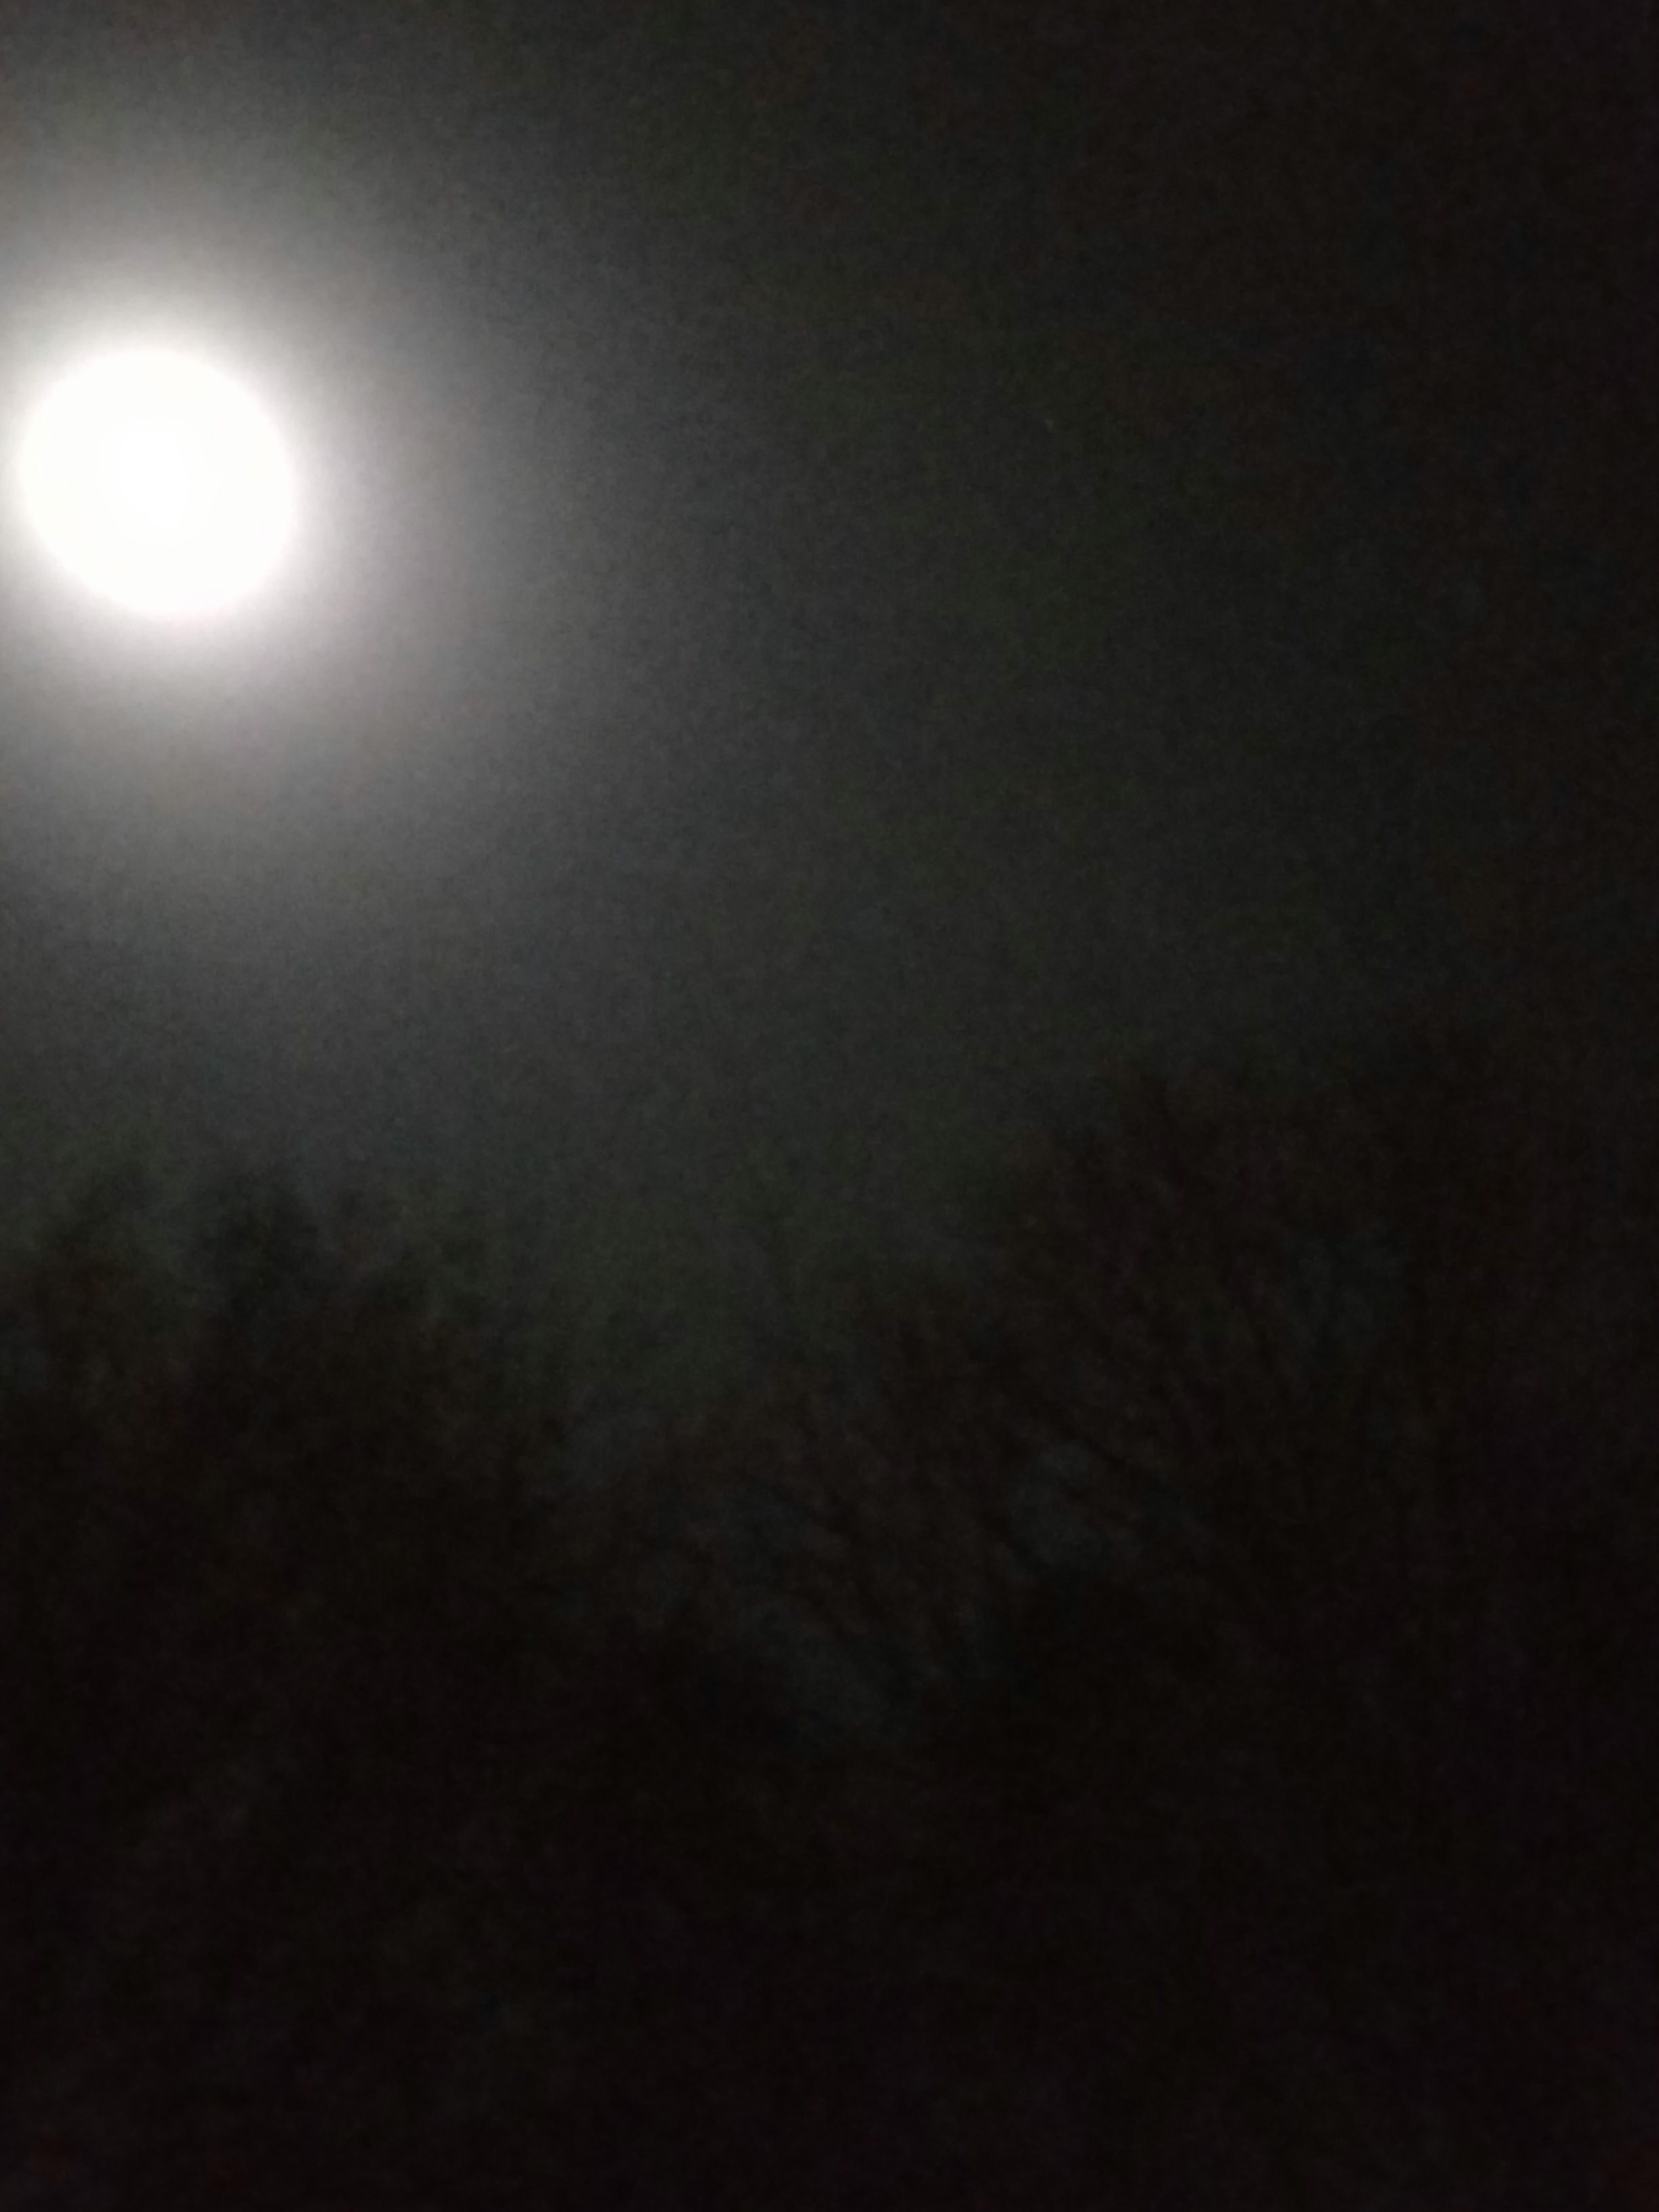 The cold moon, the ancient name given to the full moon in December.